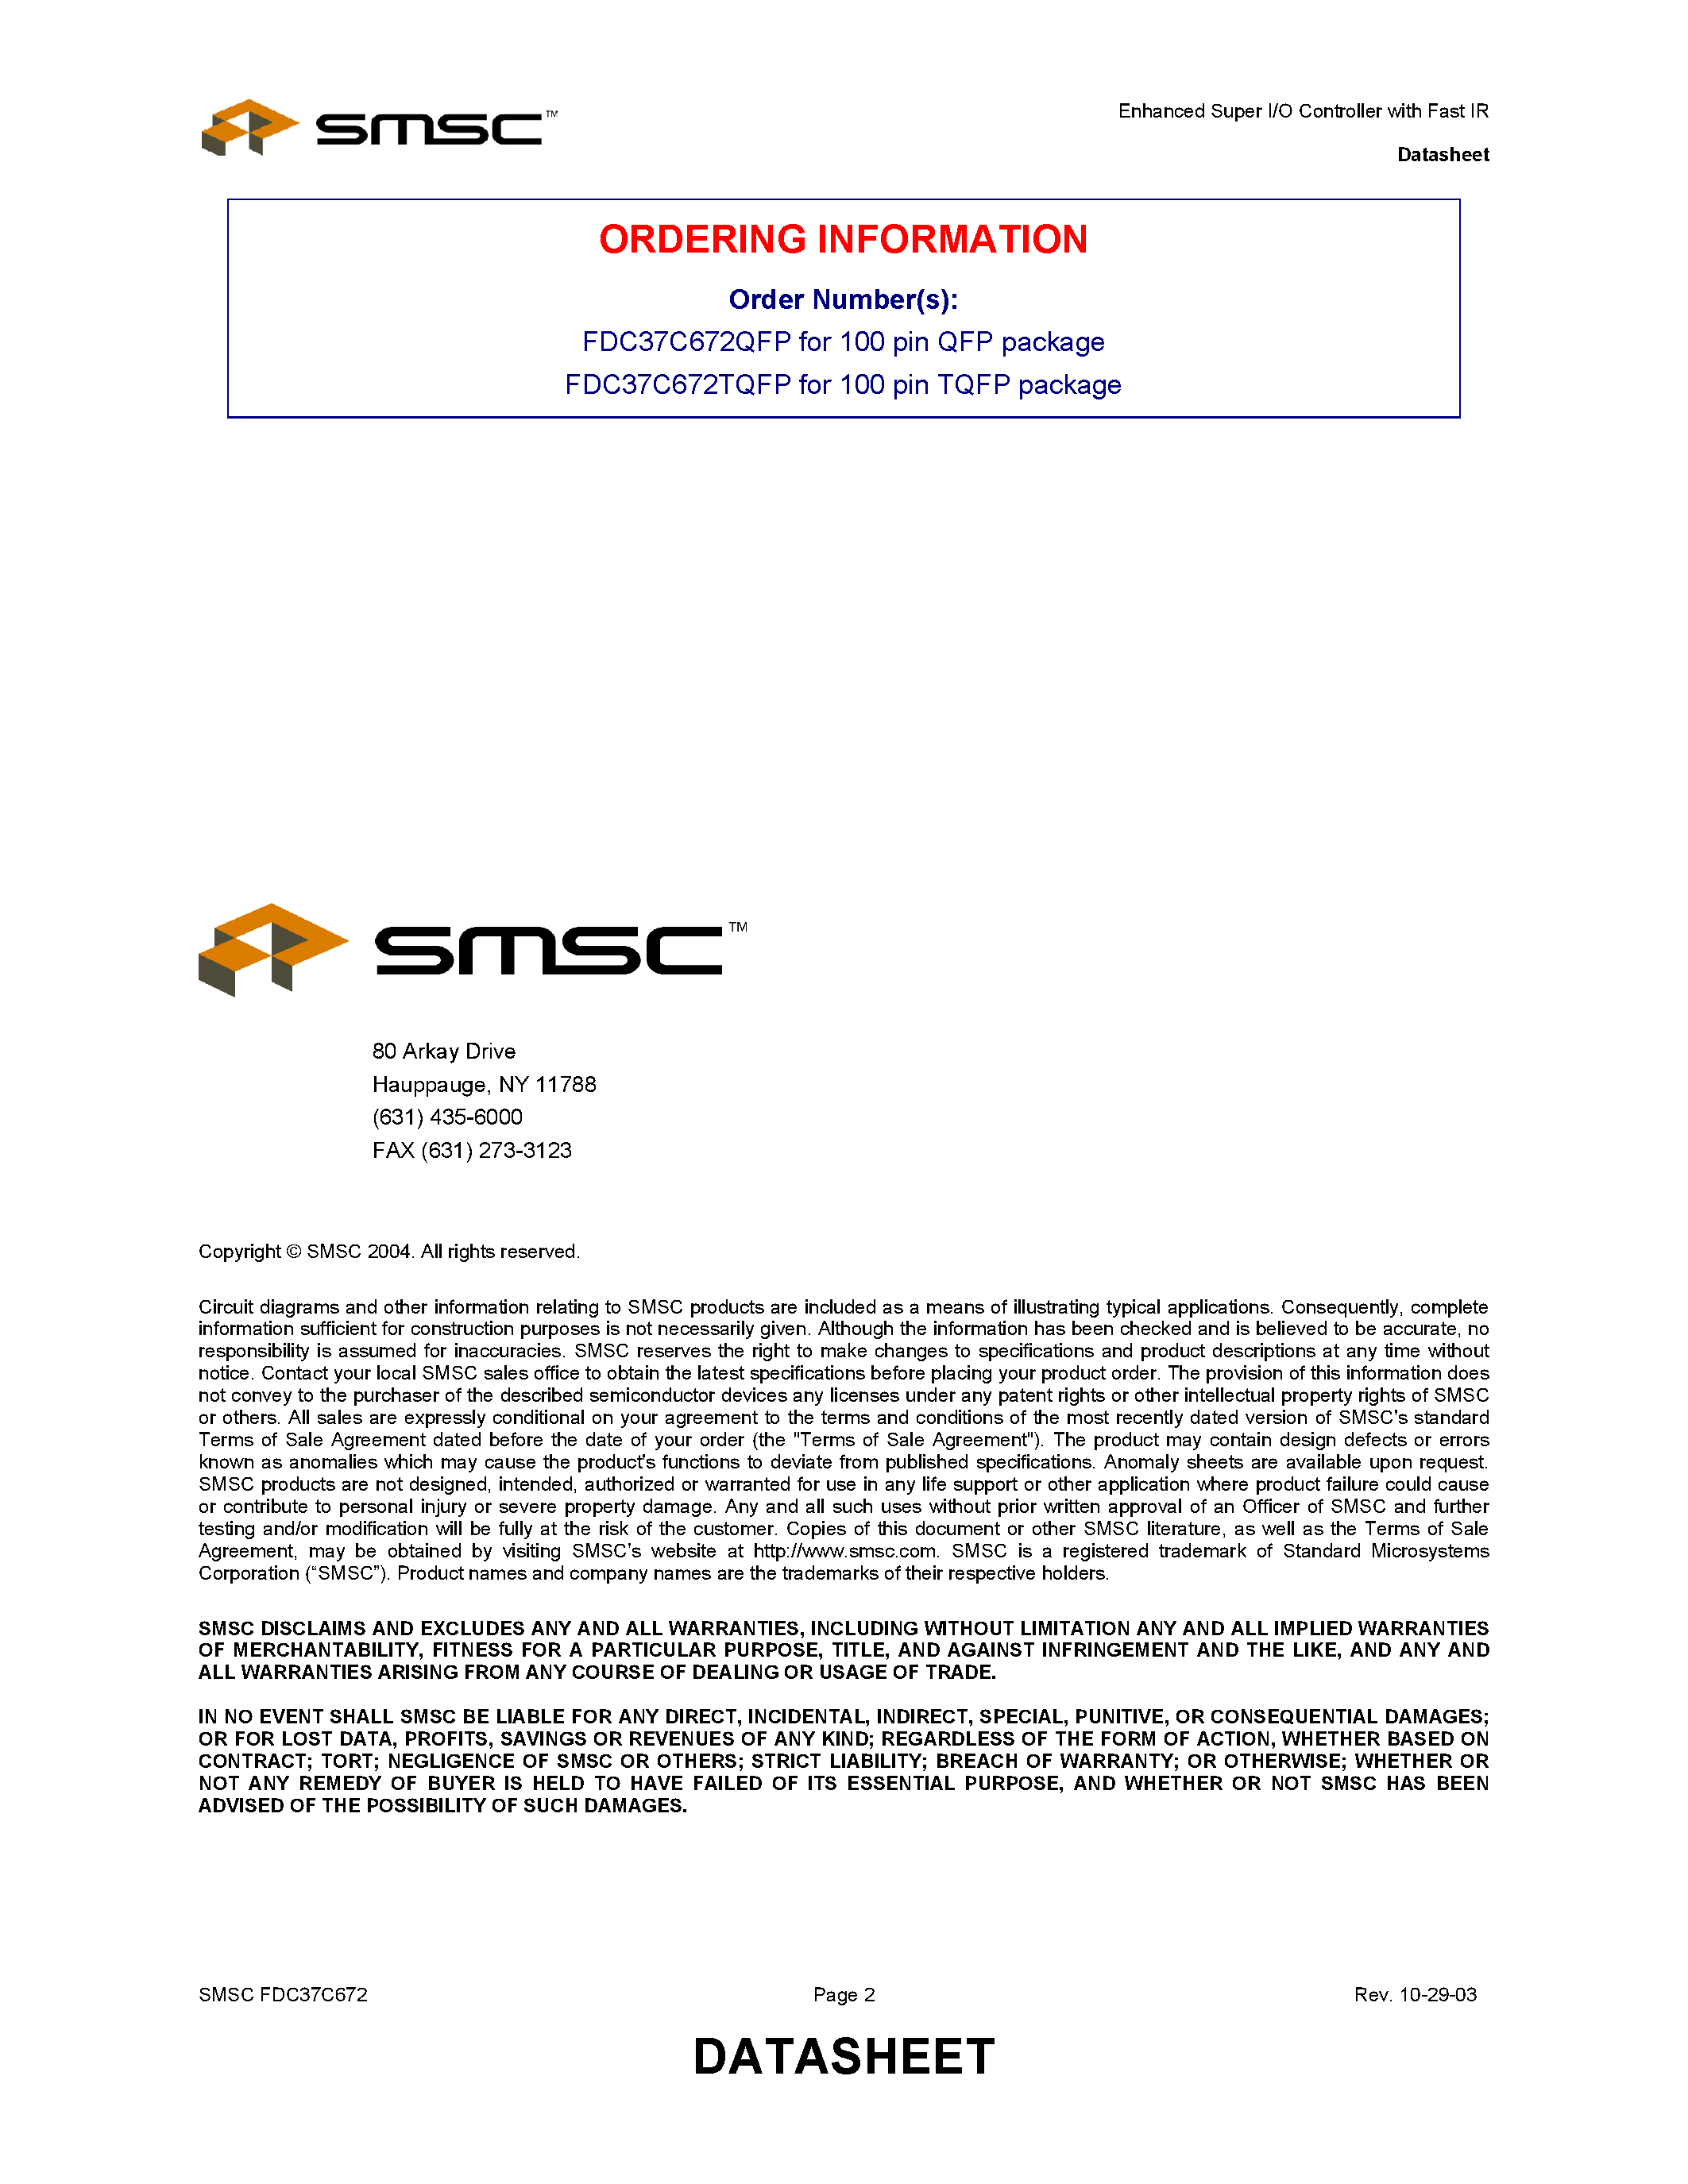 Datasheet 37C672 - ENHANCED SUPER I/O CONTROLLER WITH FAST IR page 2